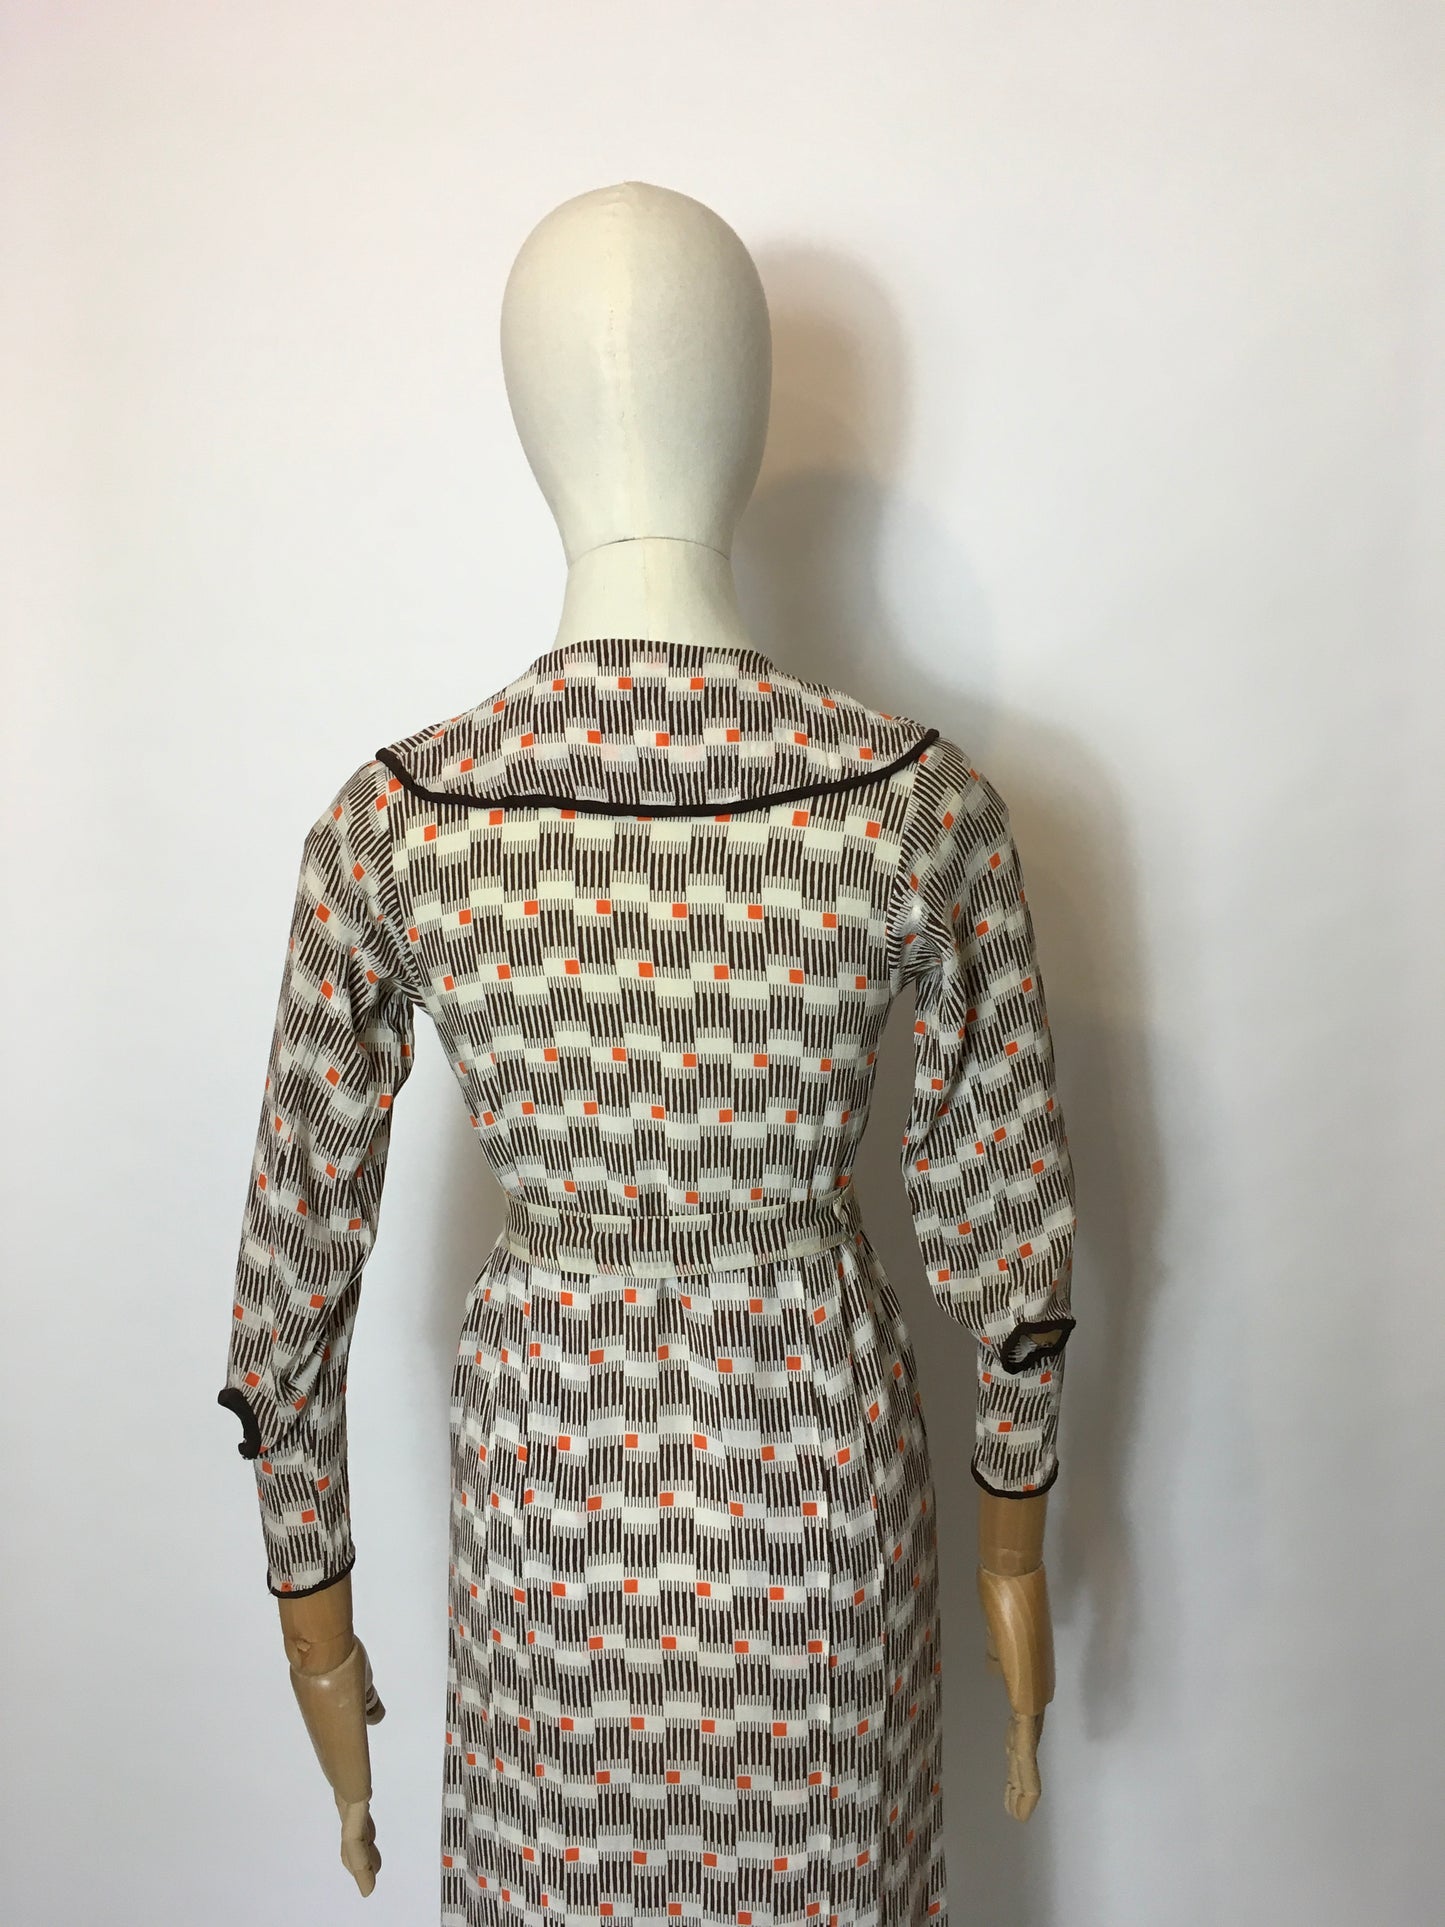 Original 1930’s Day Dress in an Amazing Geometric / Cigarette Print Dress in Browns, old Creams and deco Oranges - Festival Of Vintage Fashion Show Exclusive